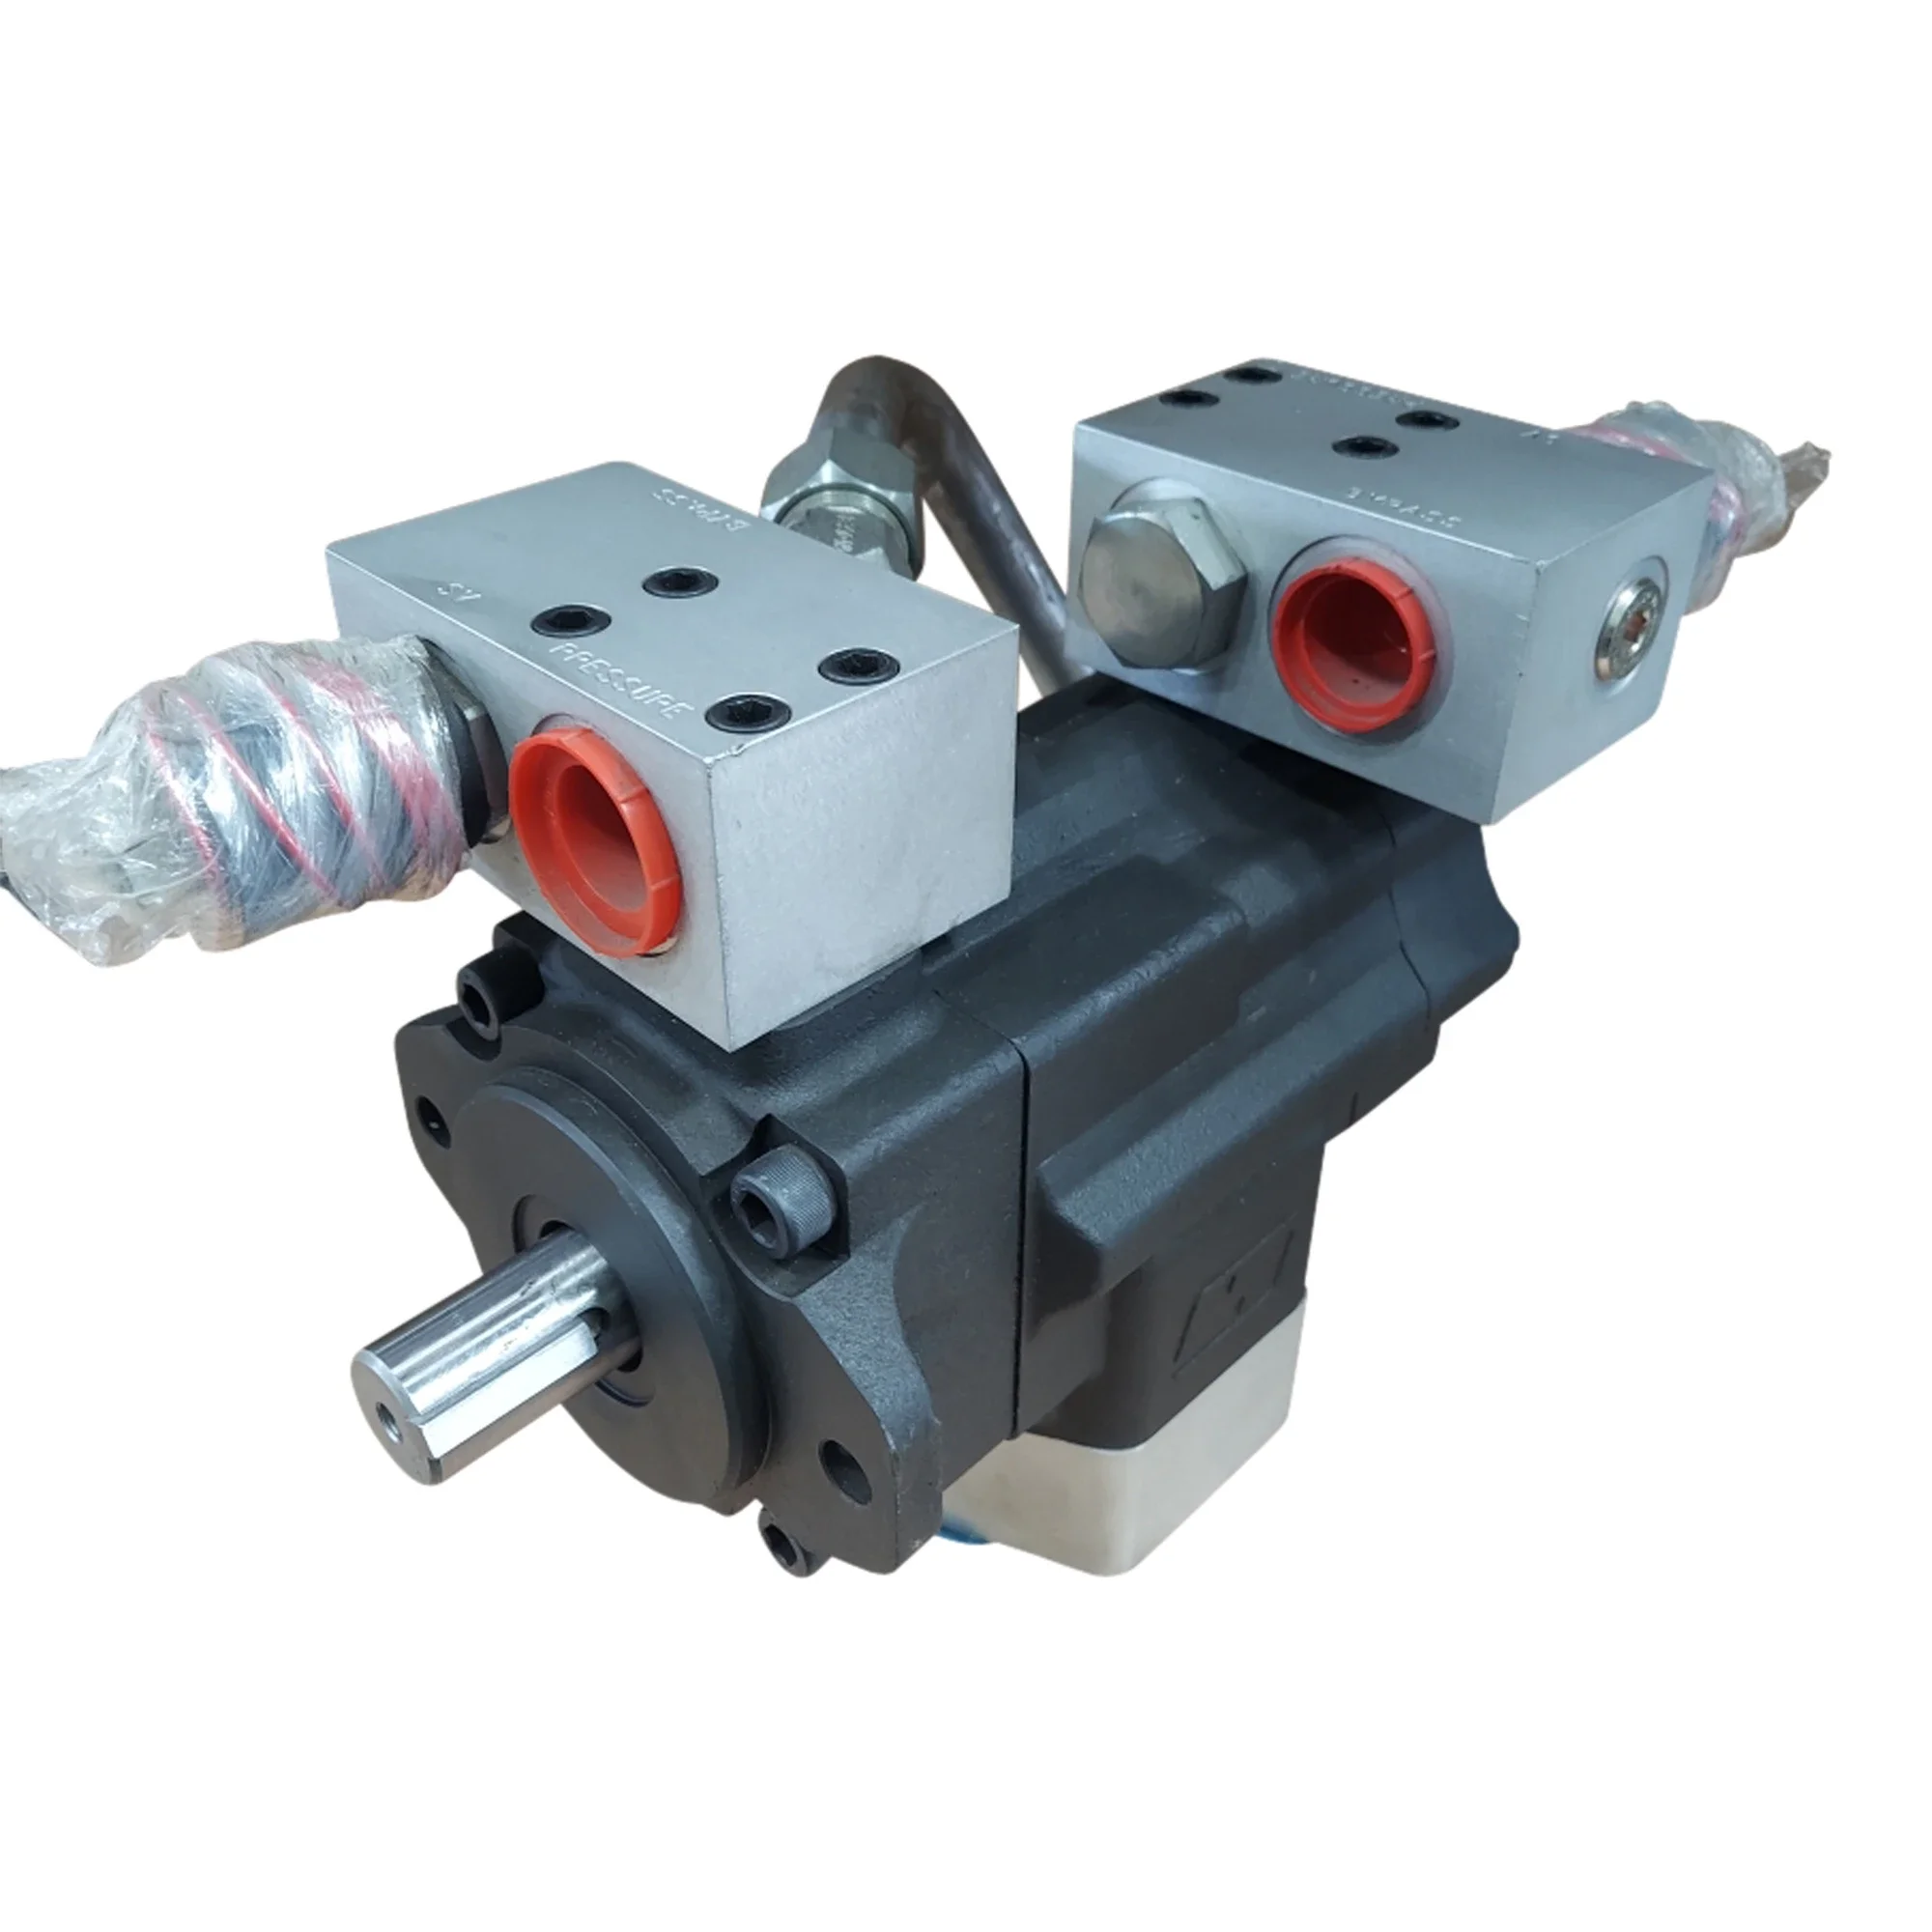 Wastebuilt® Replacement for Heil Pump Assembly